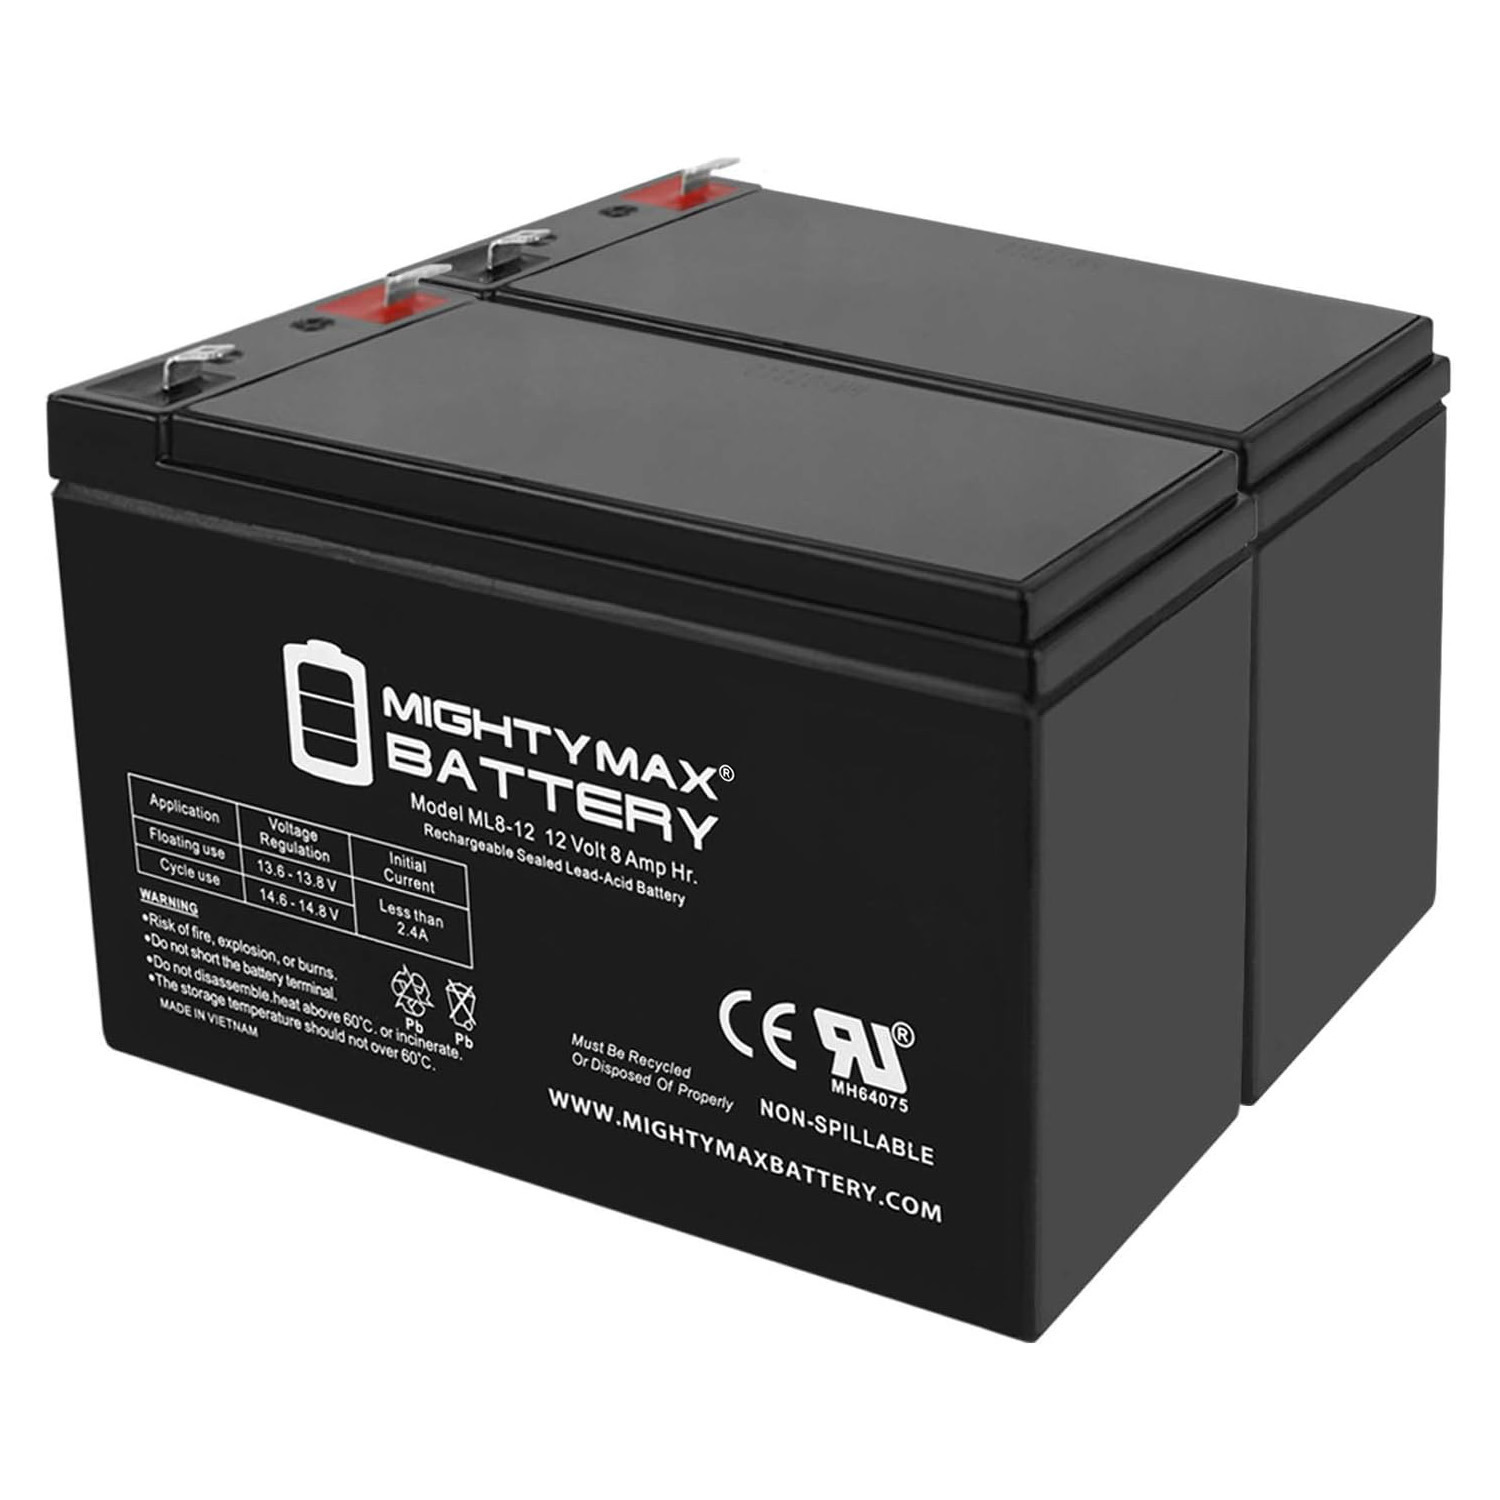 12V 8Ah SLA Replacement Battery compatible with Humminbird 398ci Combo Fishfinder - 2 Pack